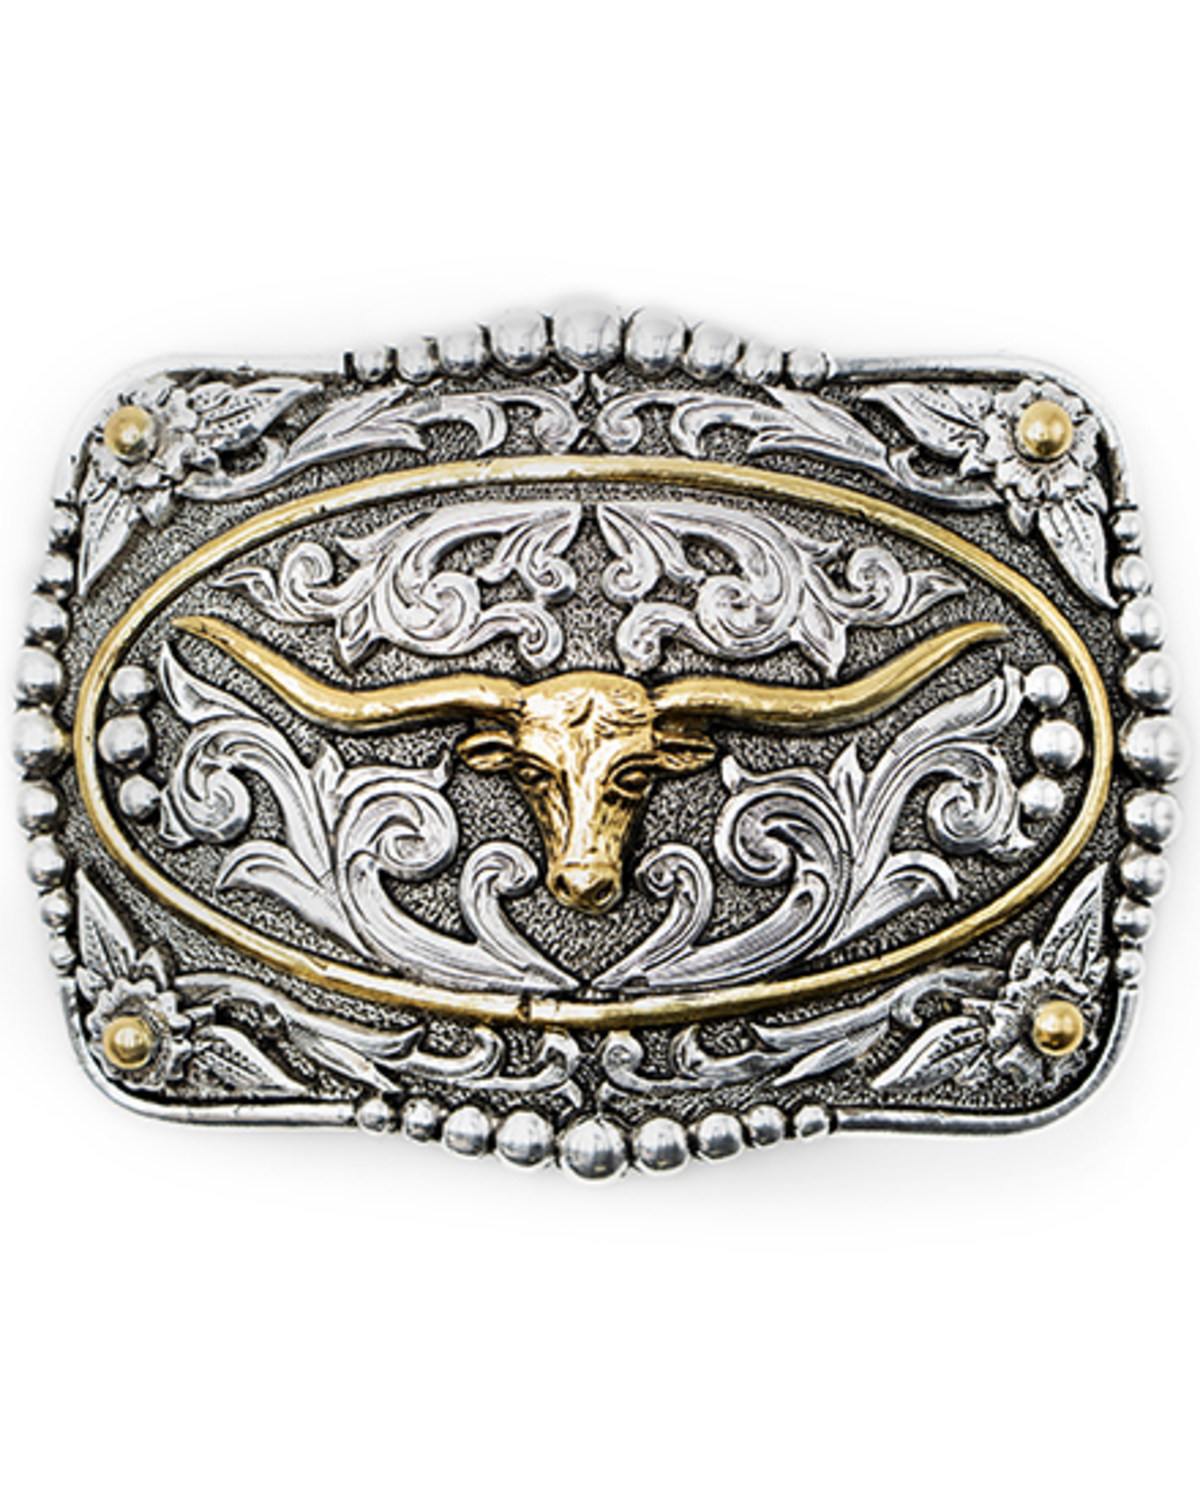 Cody James Men's Scrolled Longhorn With Gold Ring Belt Buckle